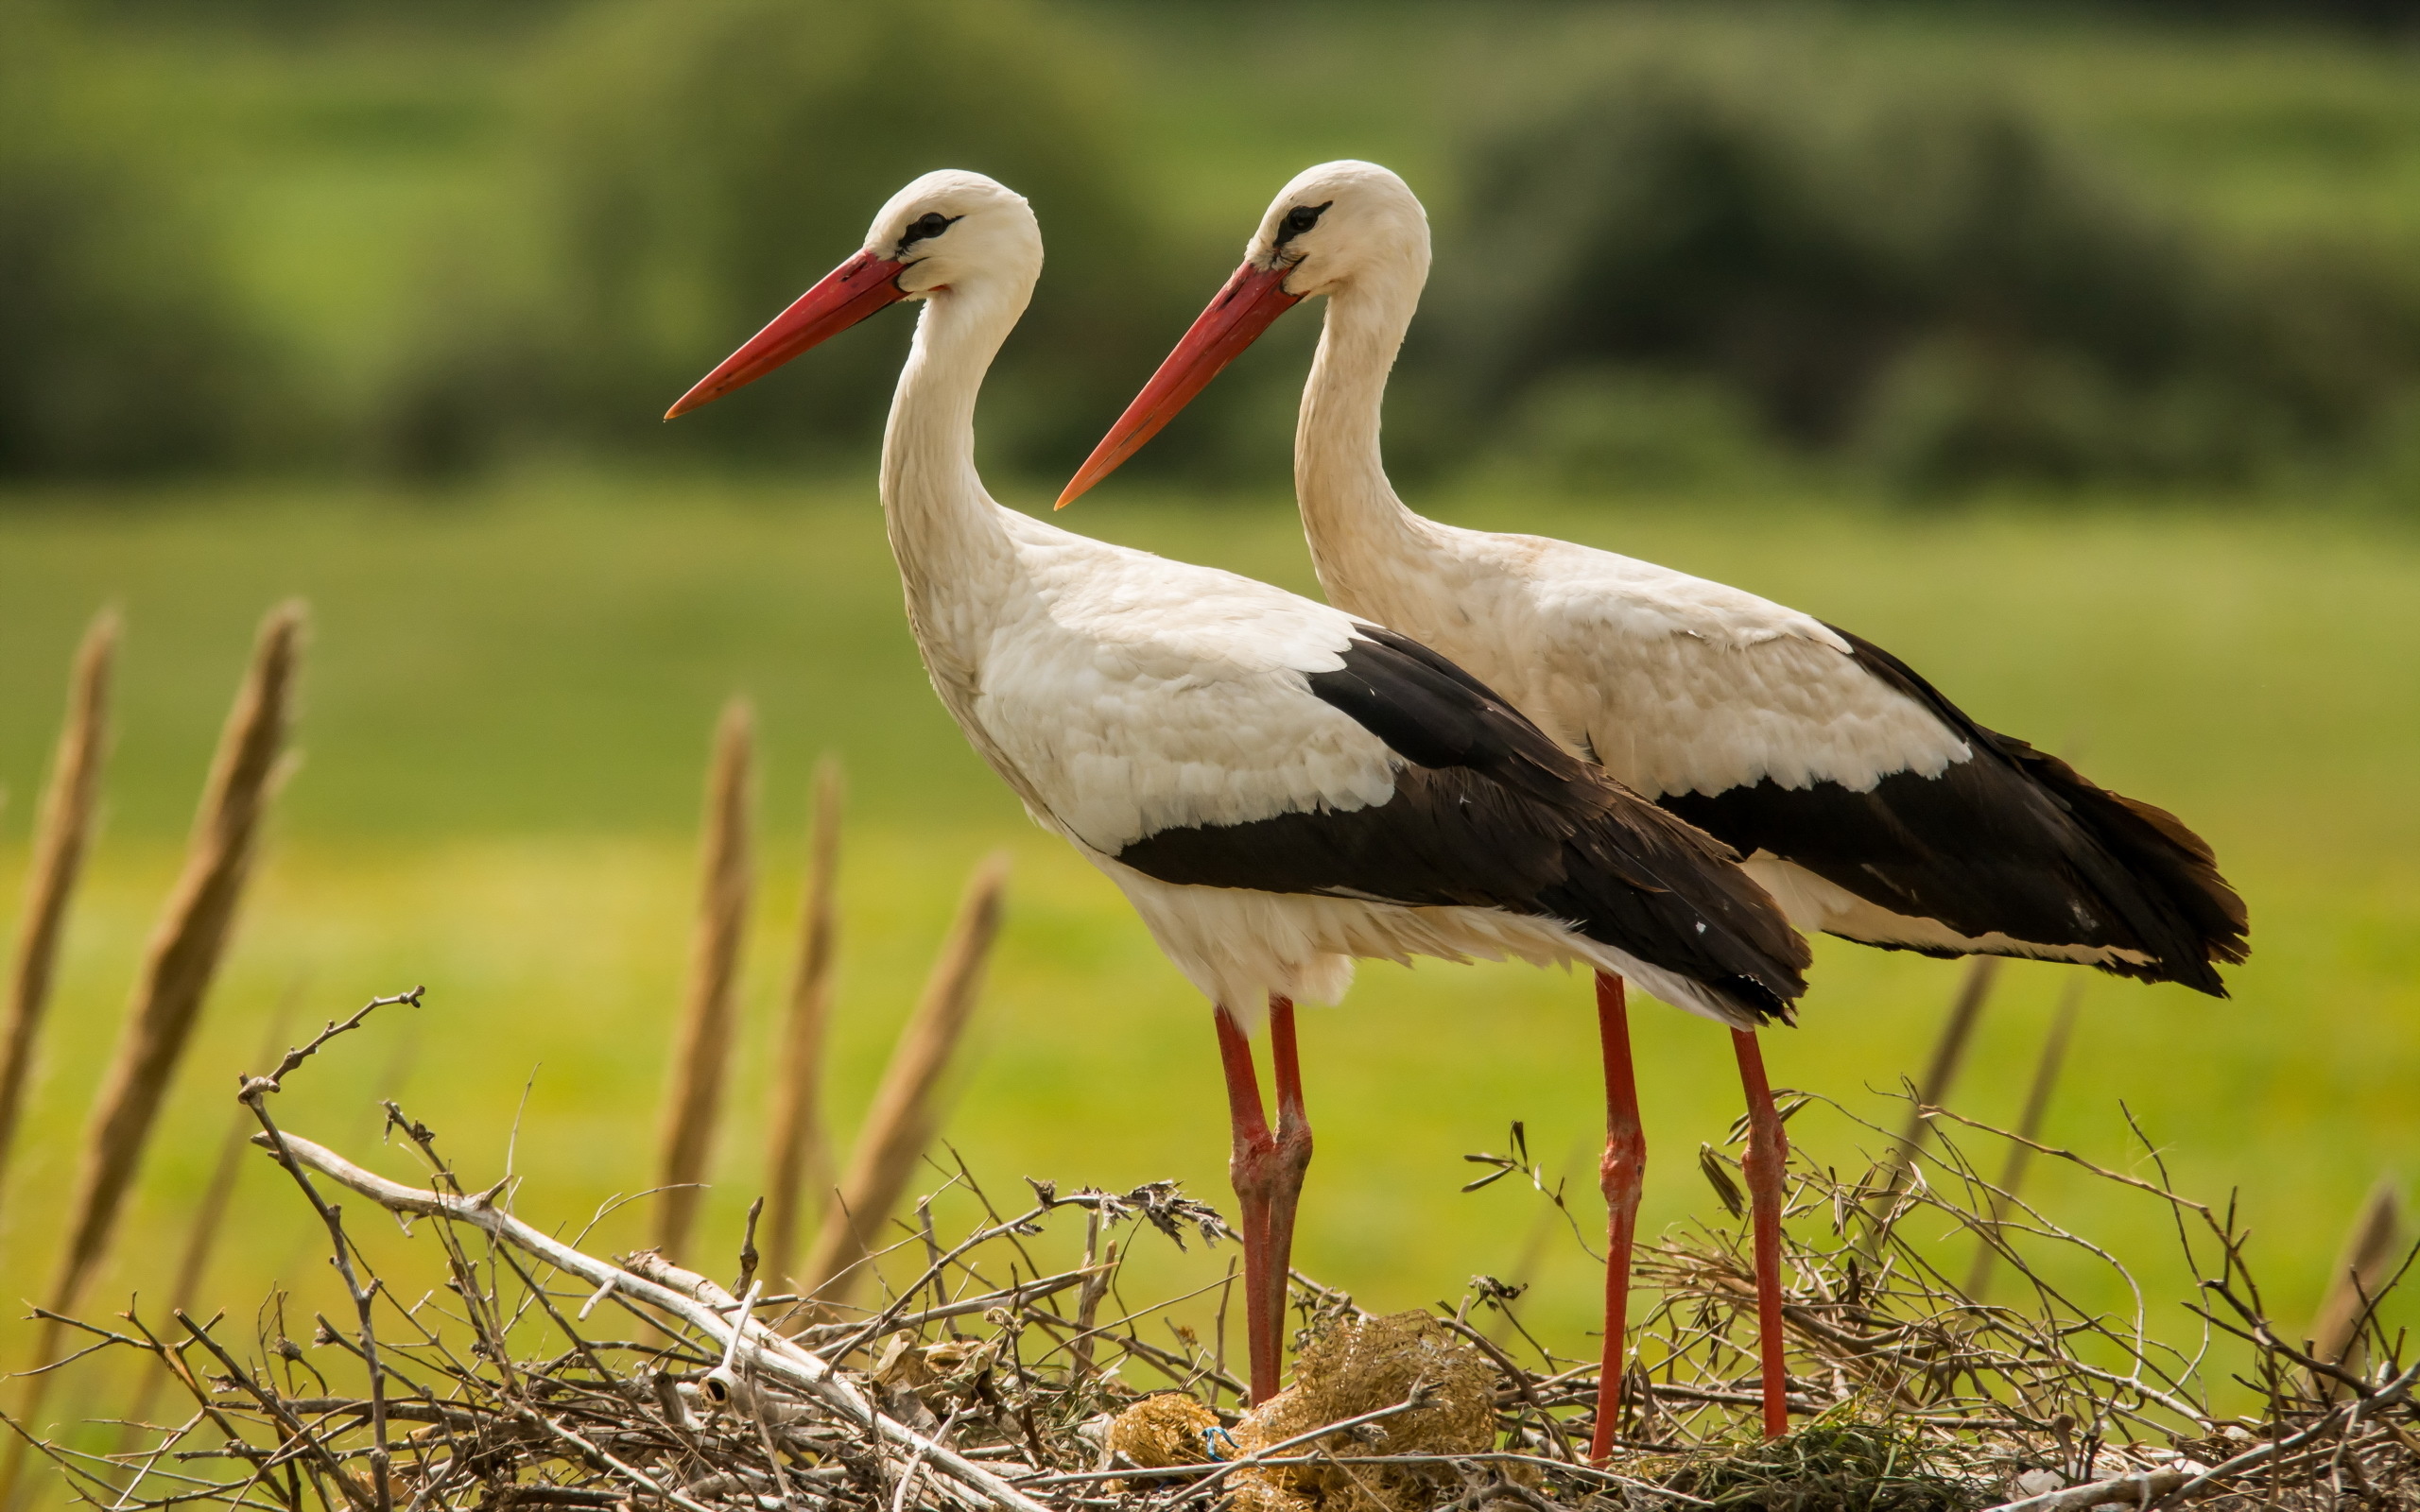 Stunning stork wallpapers, High-quality images, Striking visuals, Nature backgrounds, 2560x1600 HD Desktop